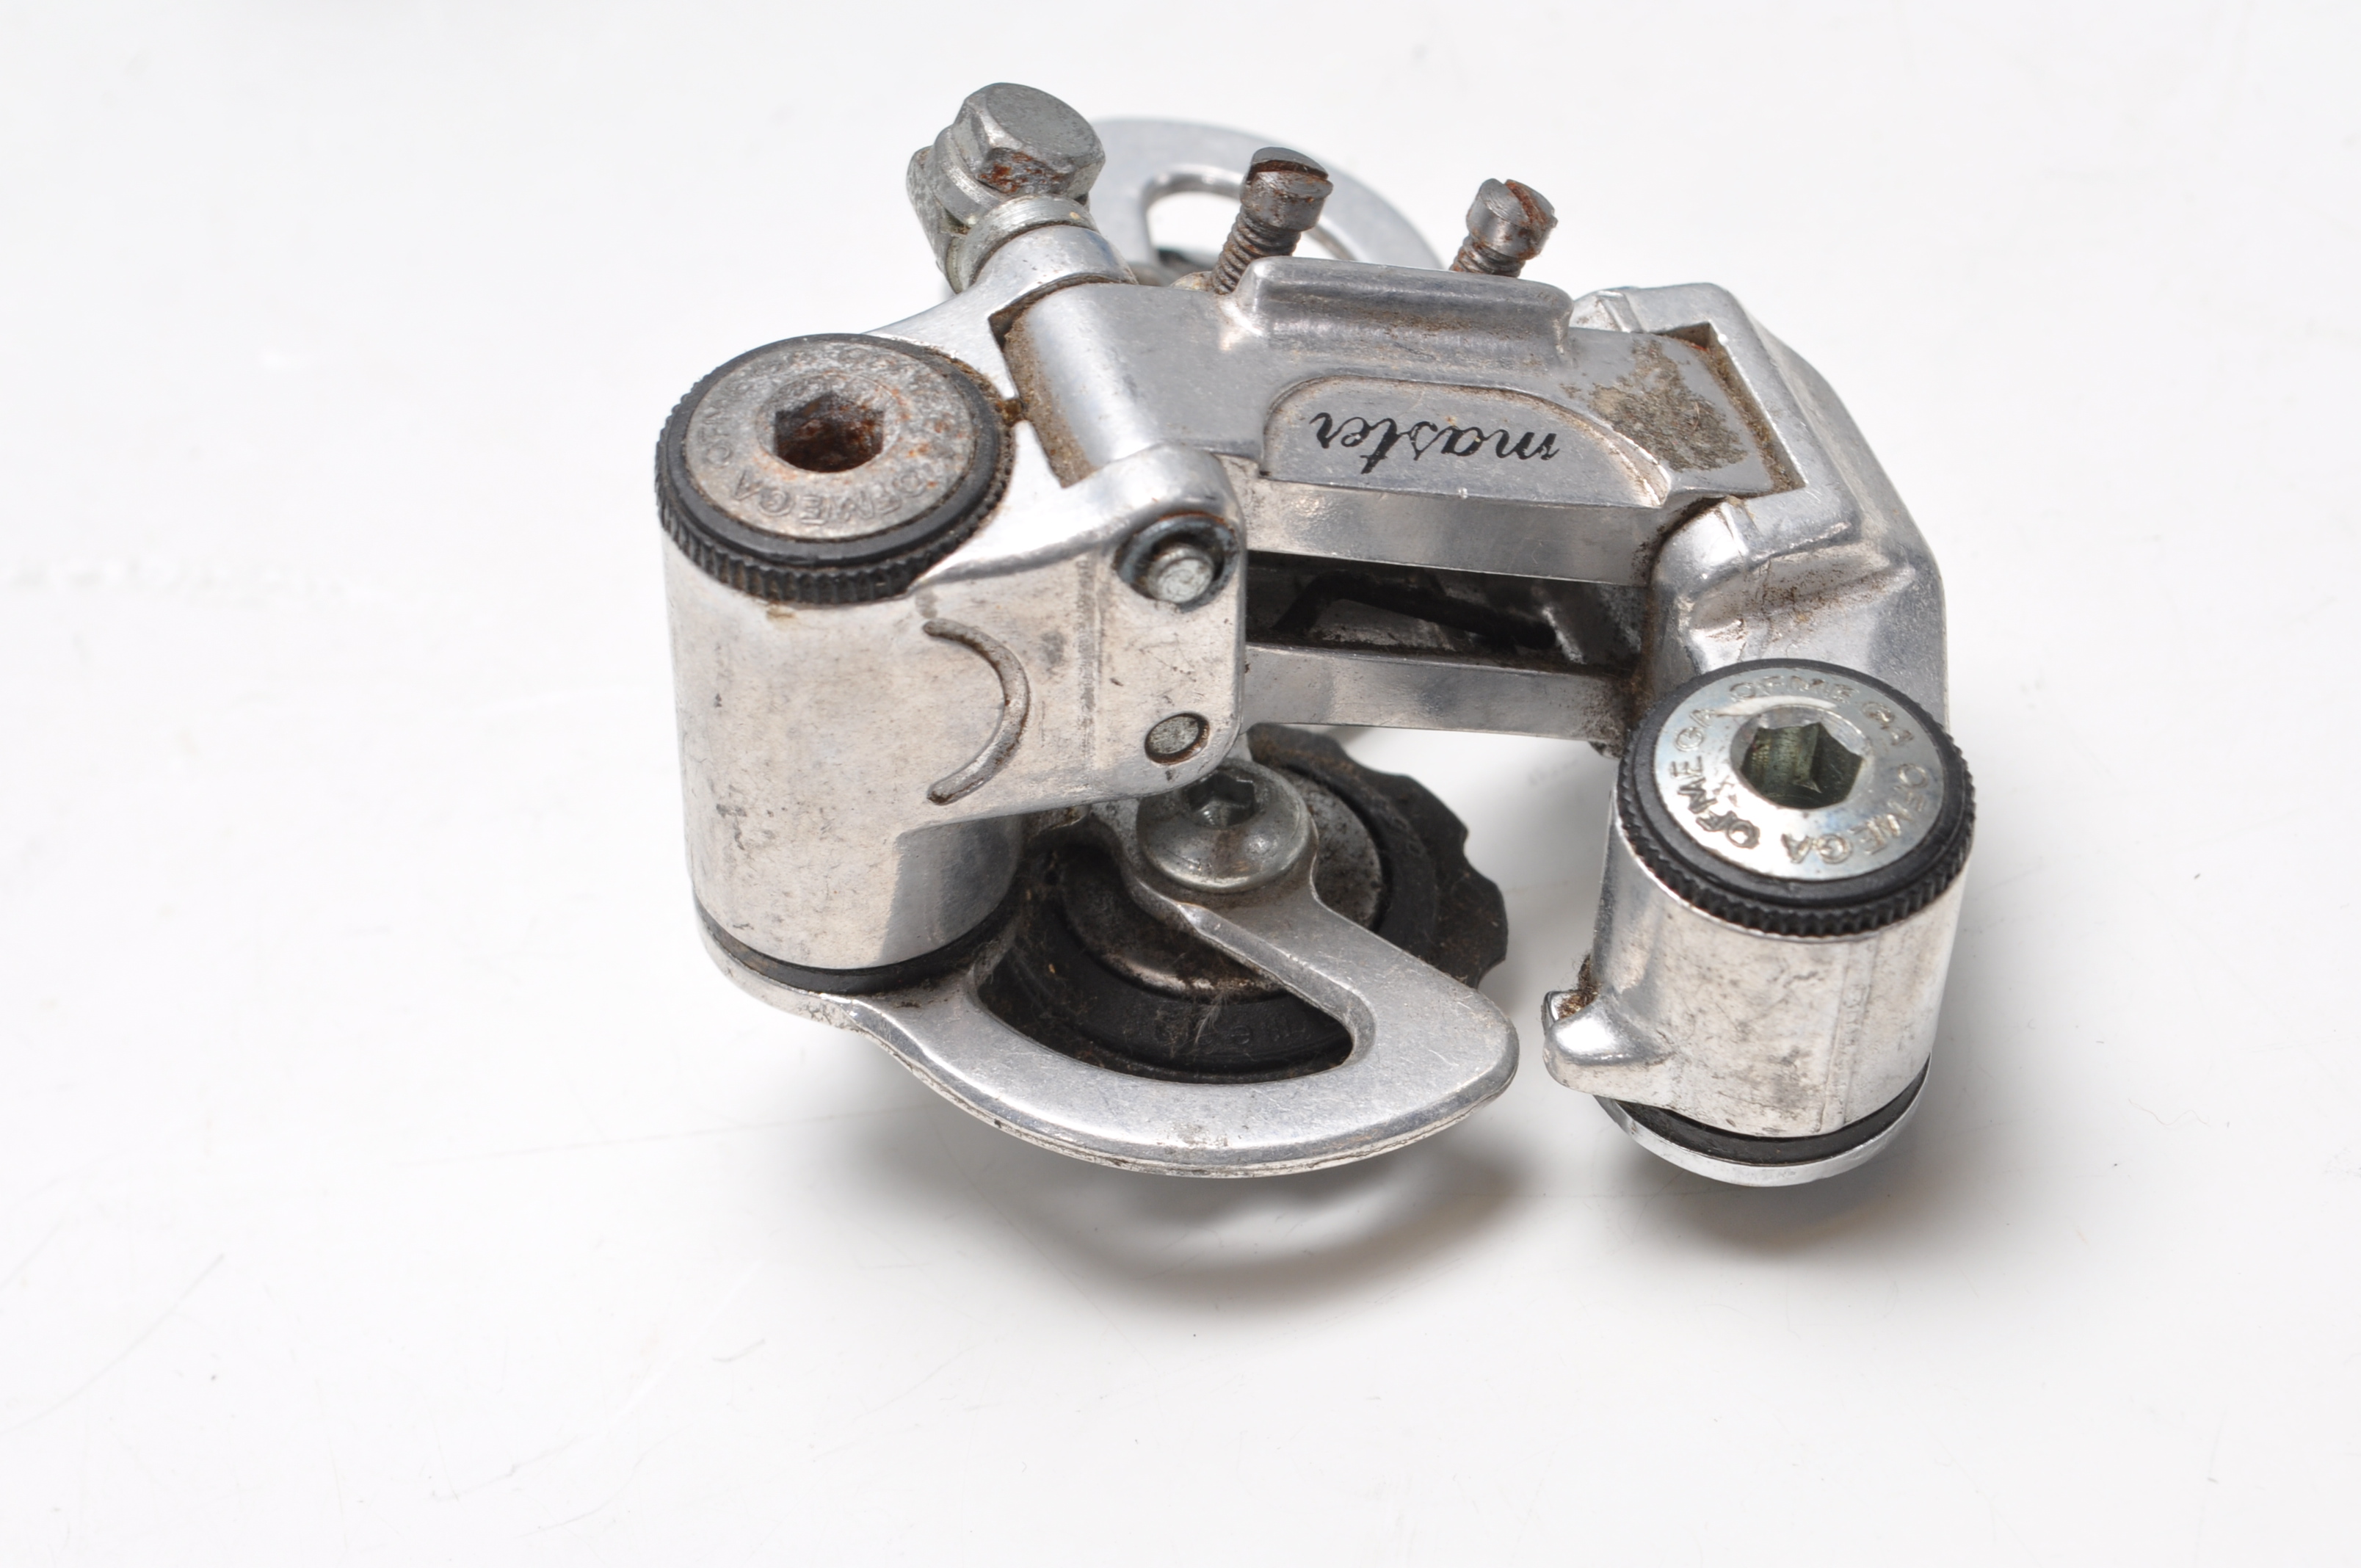 VINTAGE BICYCLES AND SPARES - COLLECTION OF THREADED BIKE HEADSET COMPONENTS. - Image 15 of 20